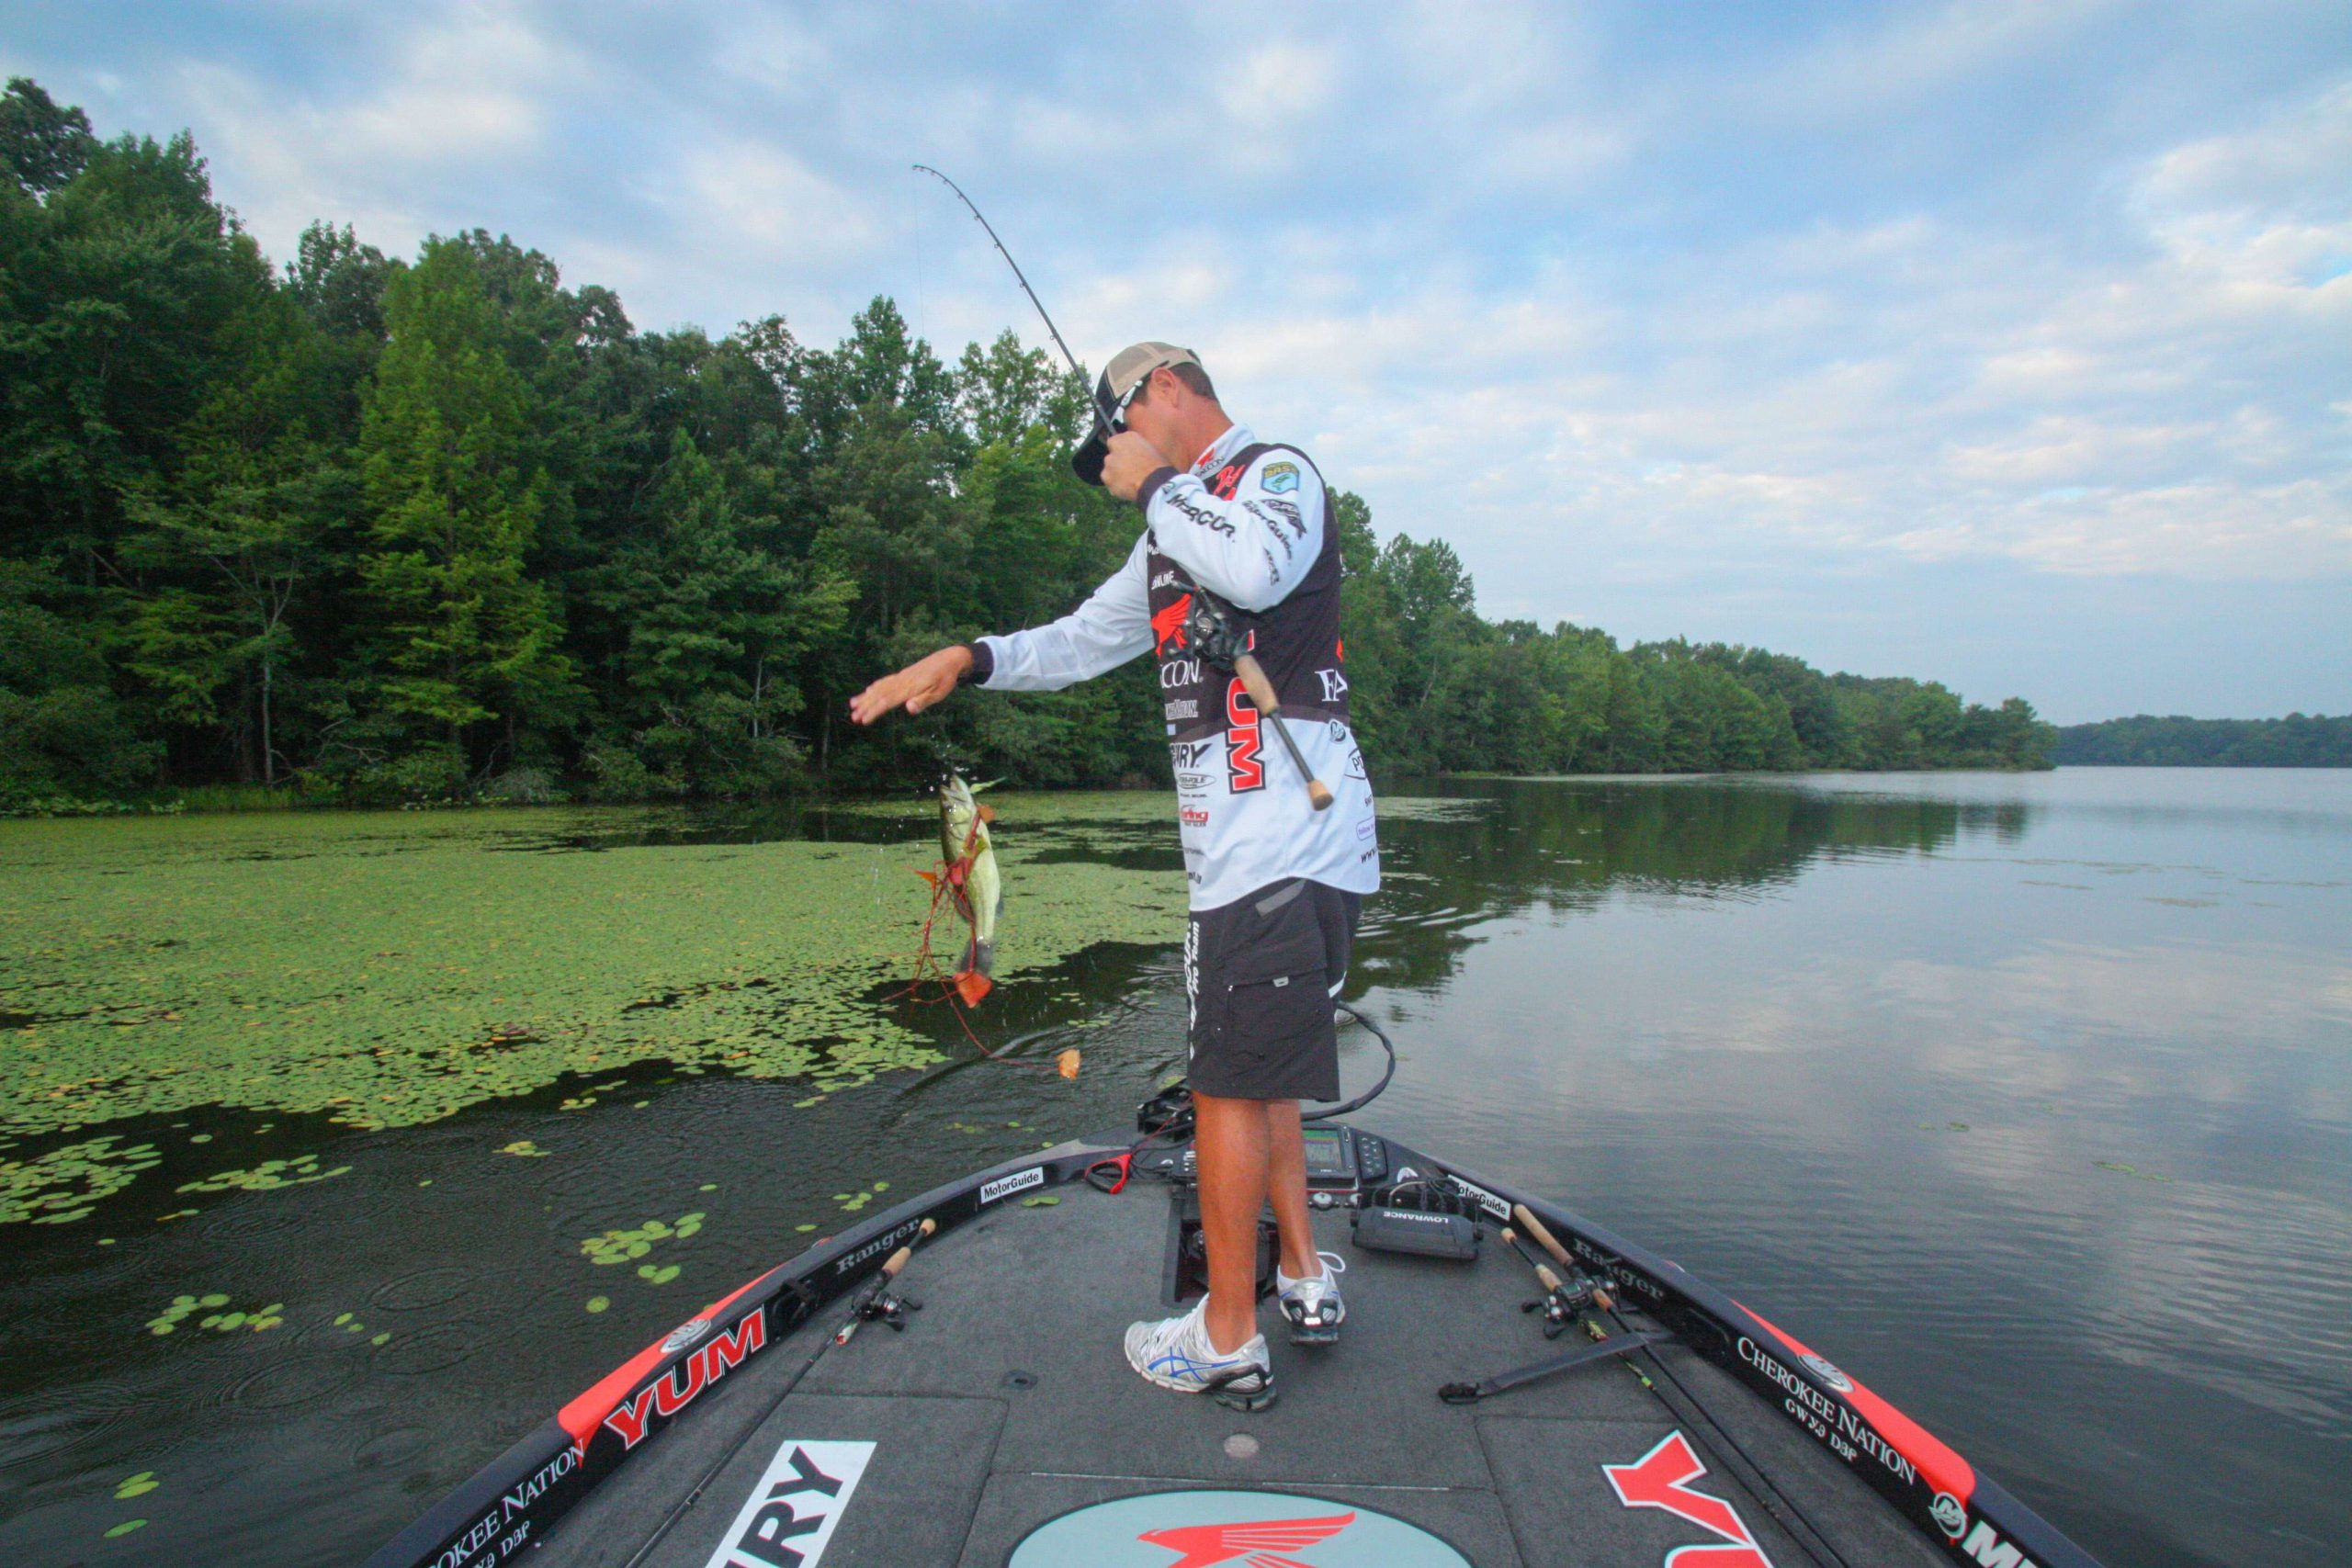 <b>7:06 a.m.</b> - Christie bags his first keeper largemouth of the day on a frog.